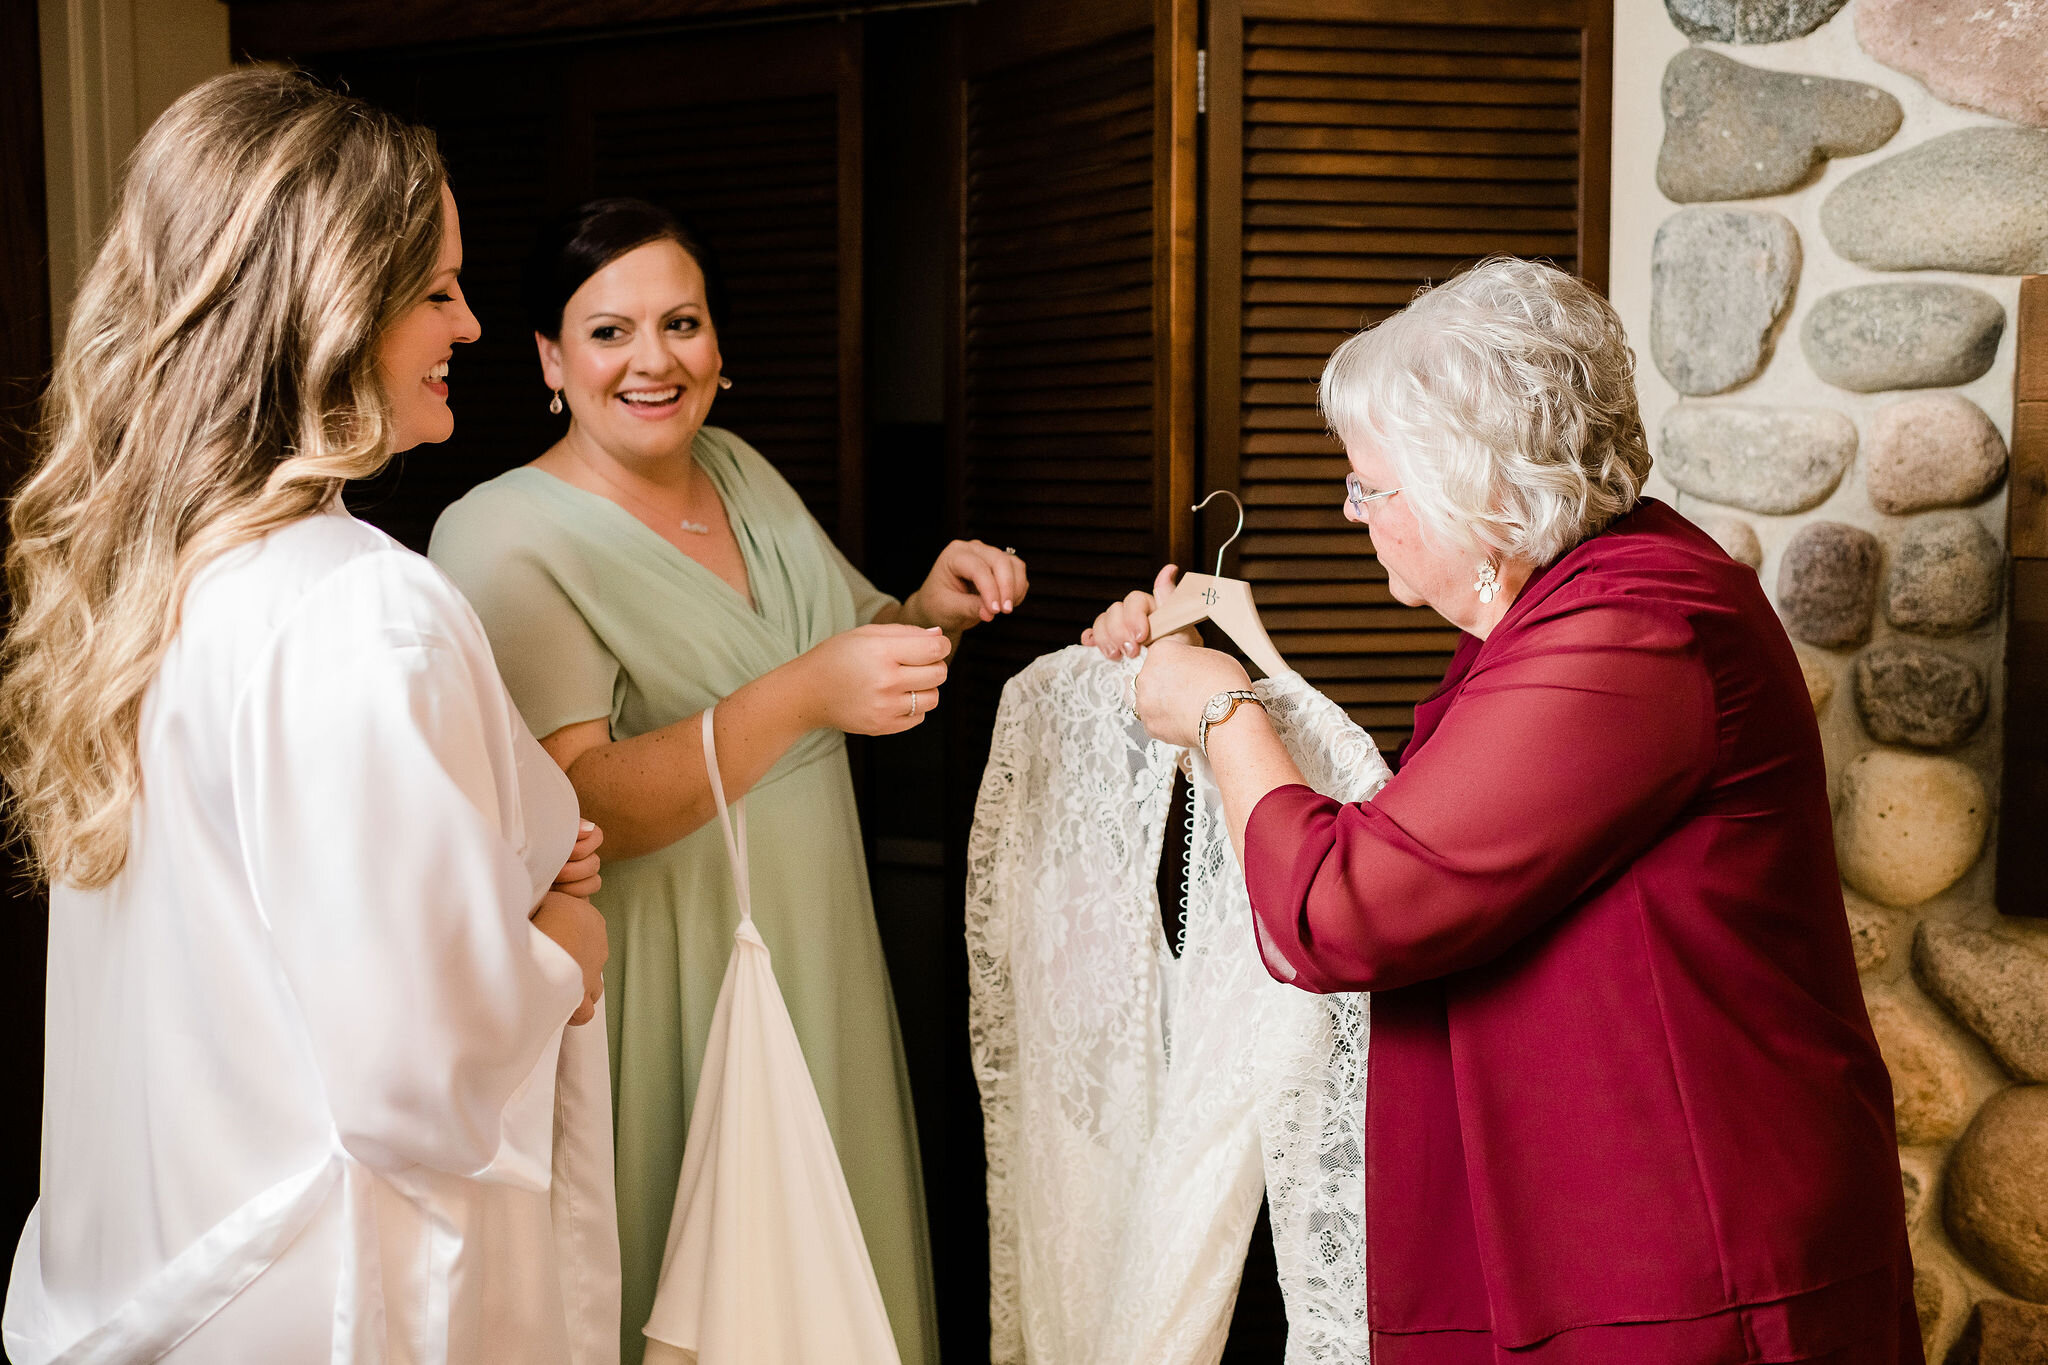 Bride and her mom getting ready to put her dress on